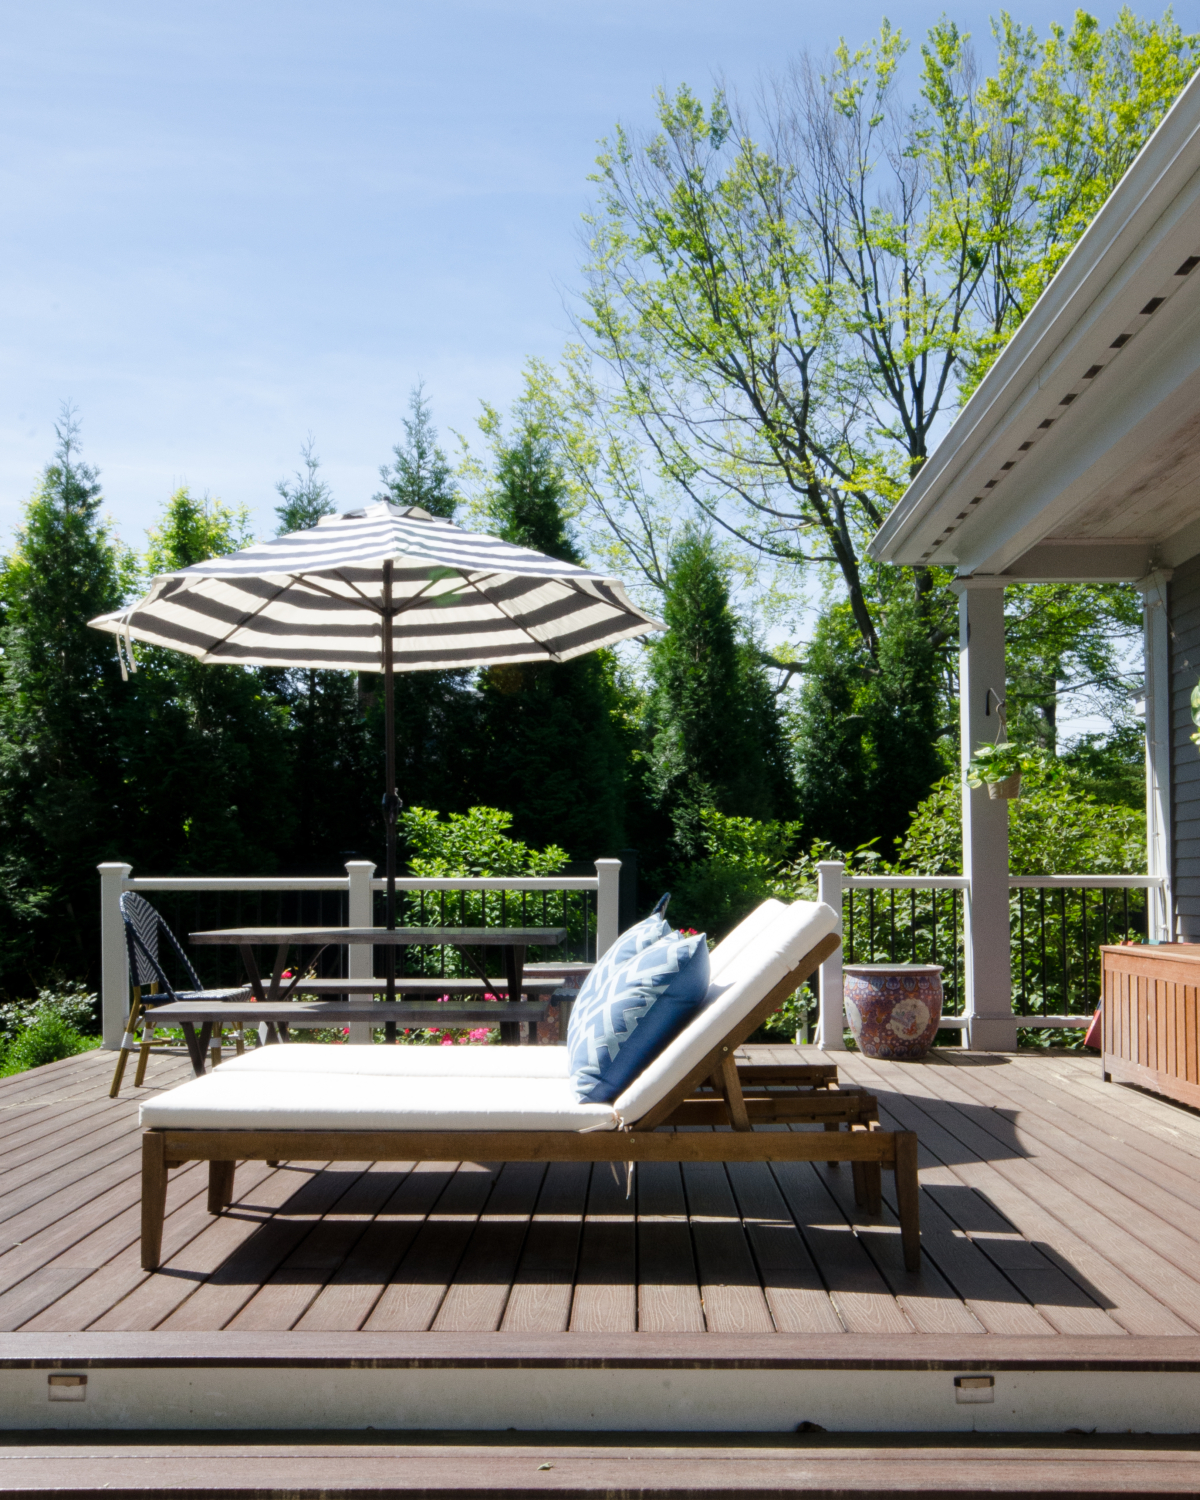 Gorgeous deck space with lush plantings, dining space, and lounge chairs.